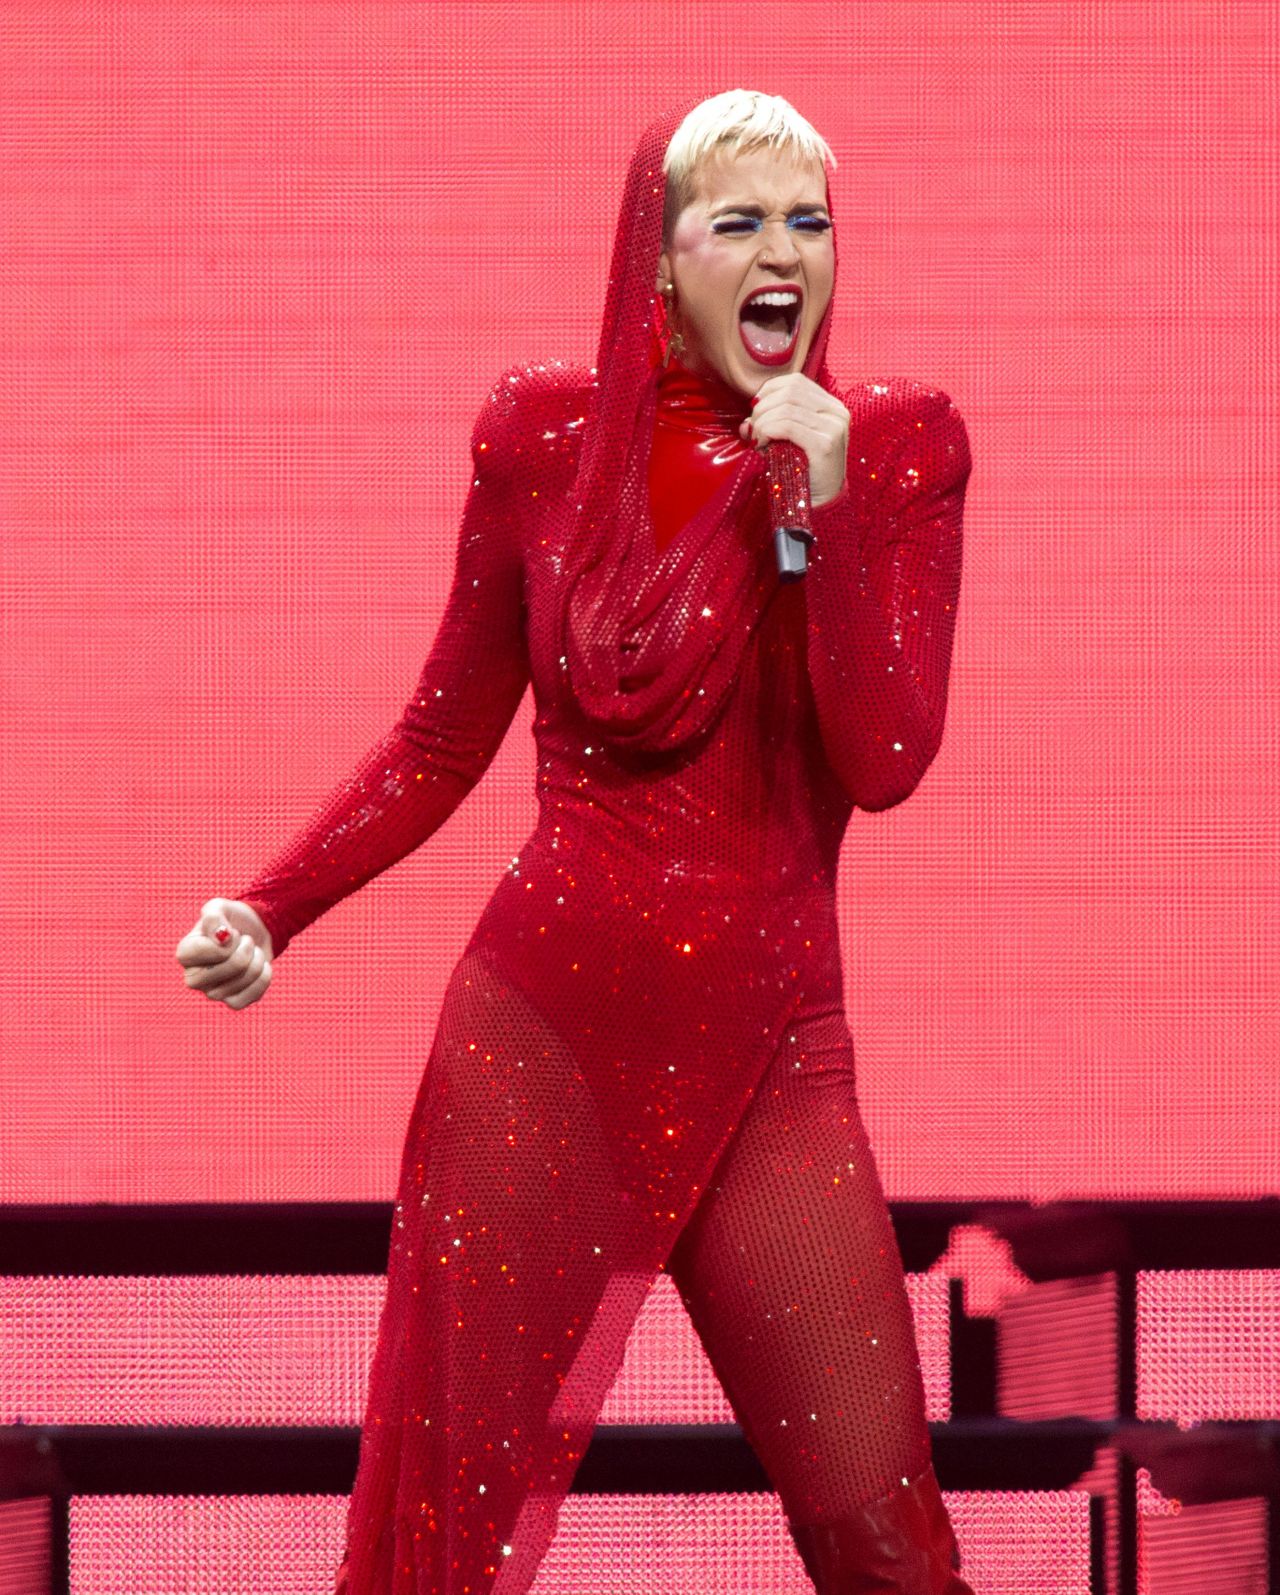 Katy Perry Performs Live at 